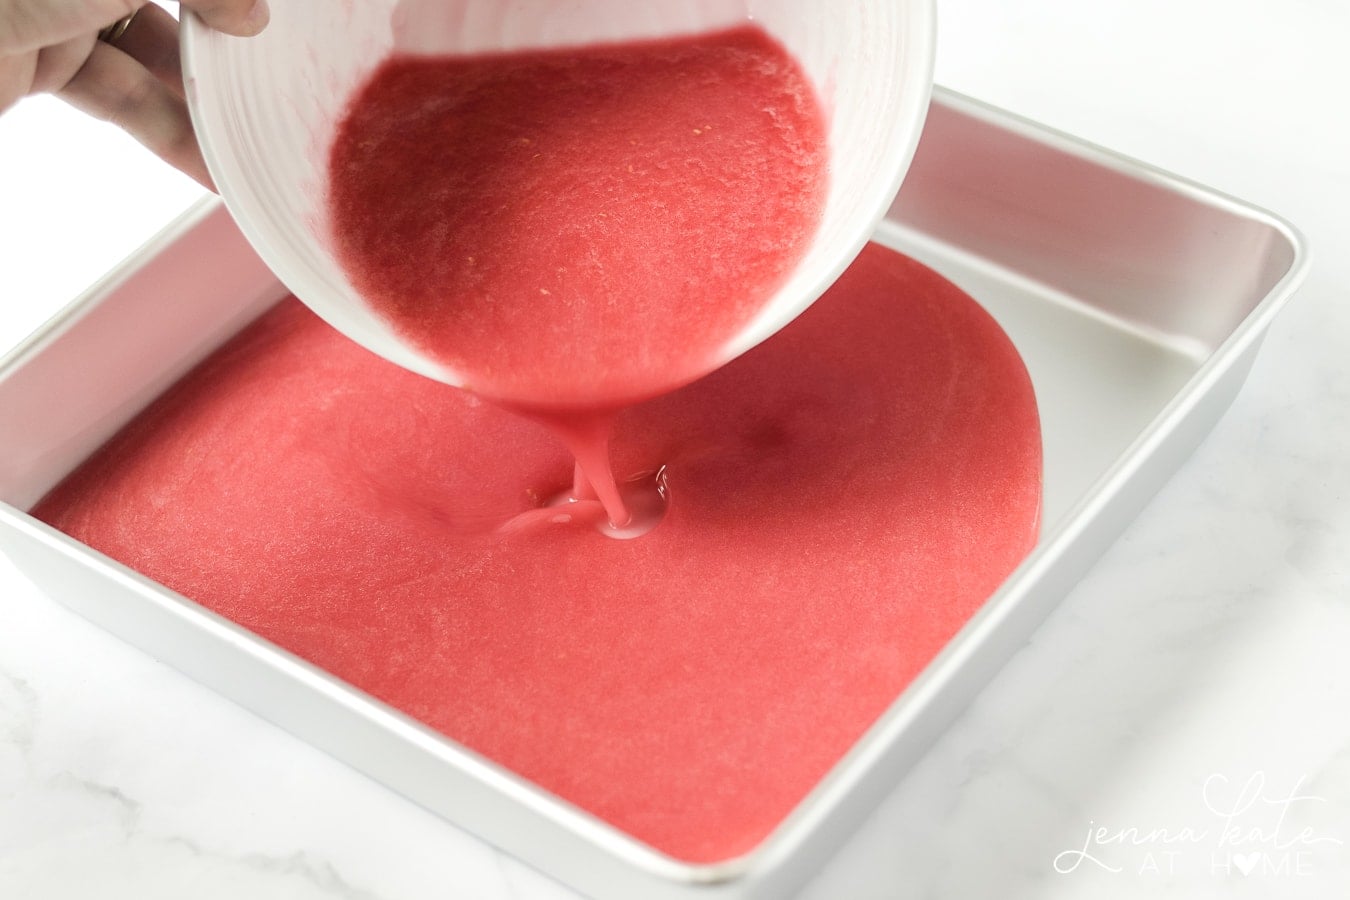 Pouring the sorbet mix into a metal pan